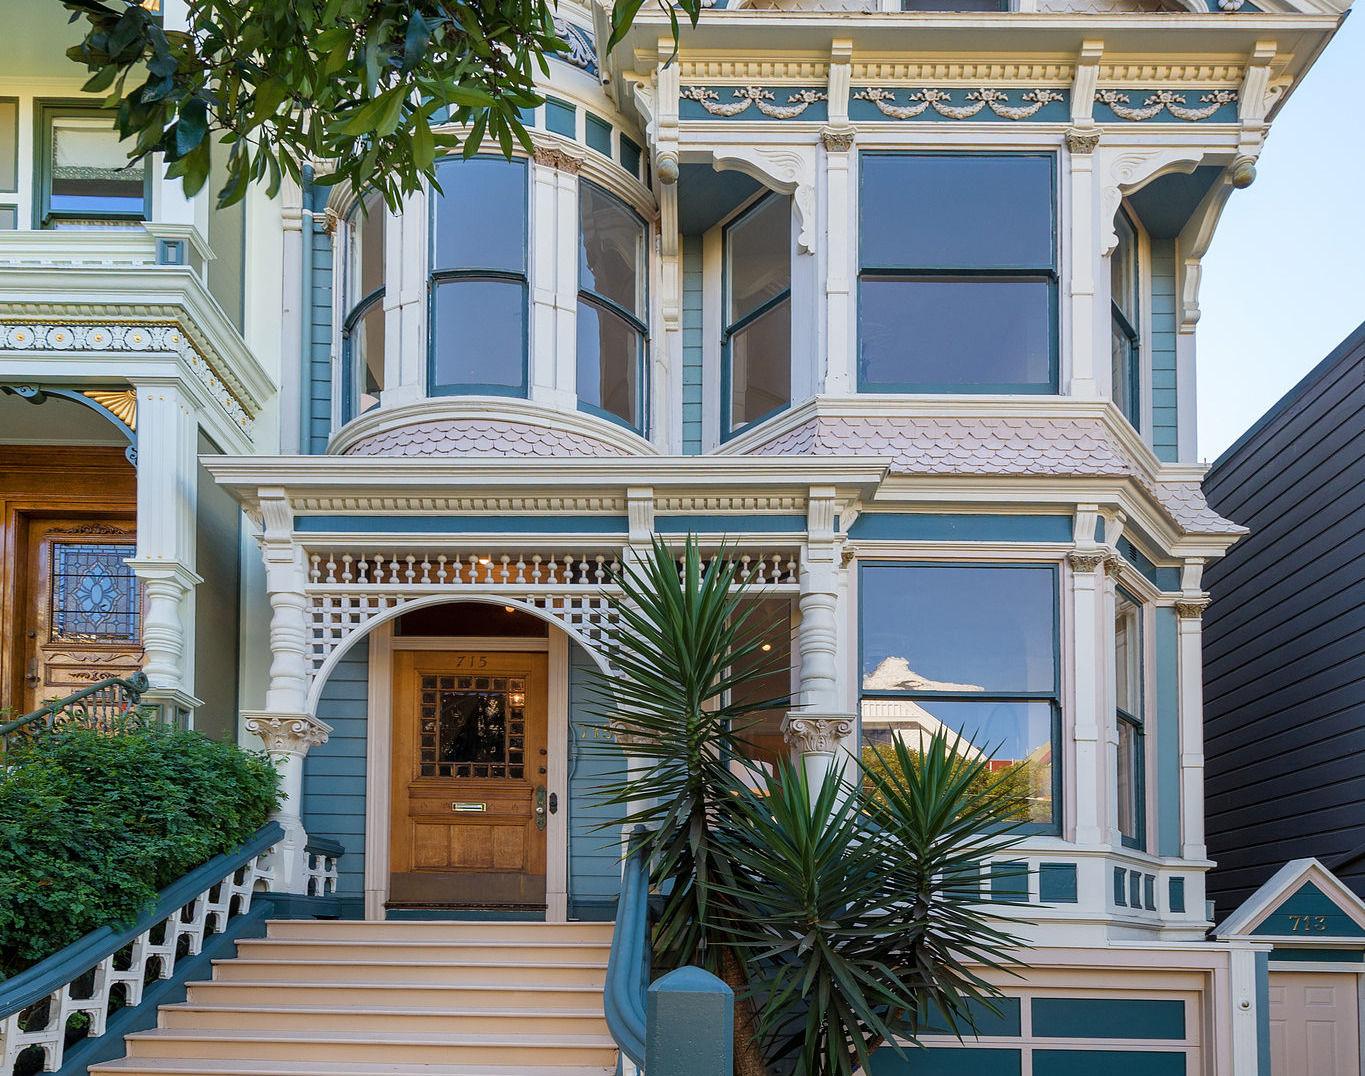 Property Photo: Front exterior of 715 Ashbury Street, showing a beautiful blue Victorian home